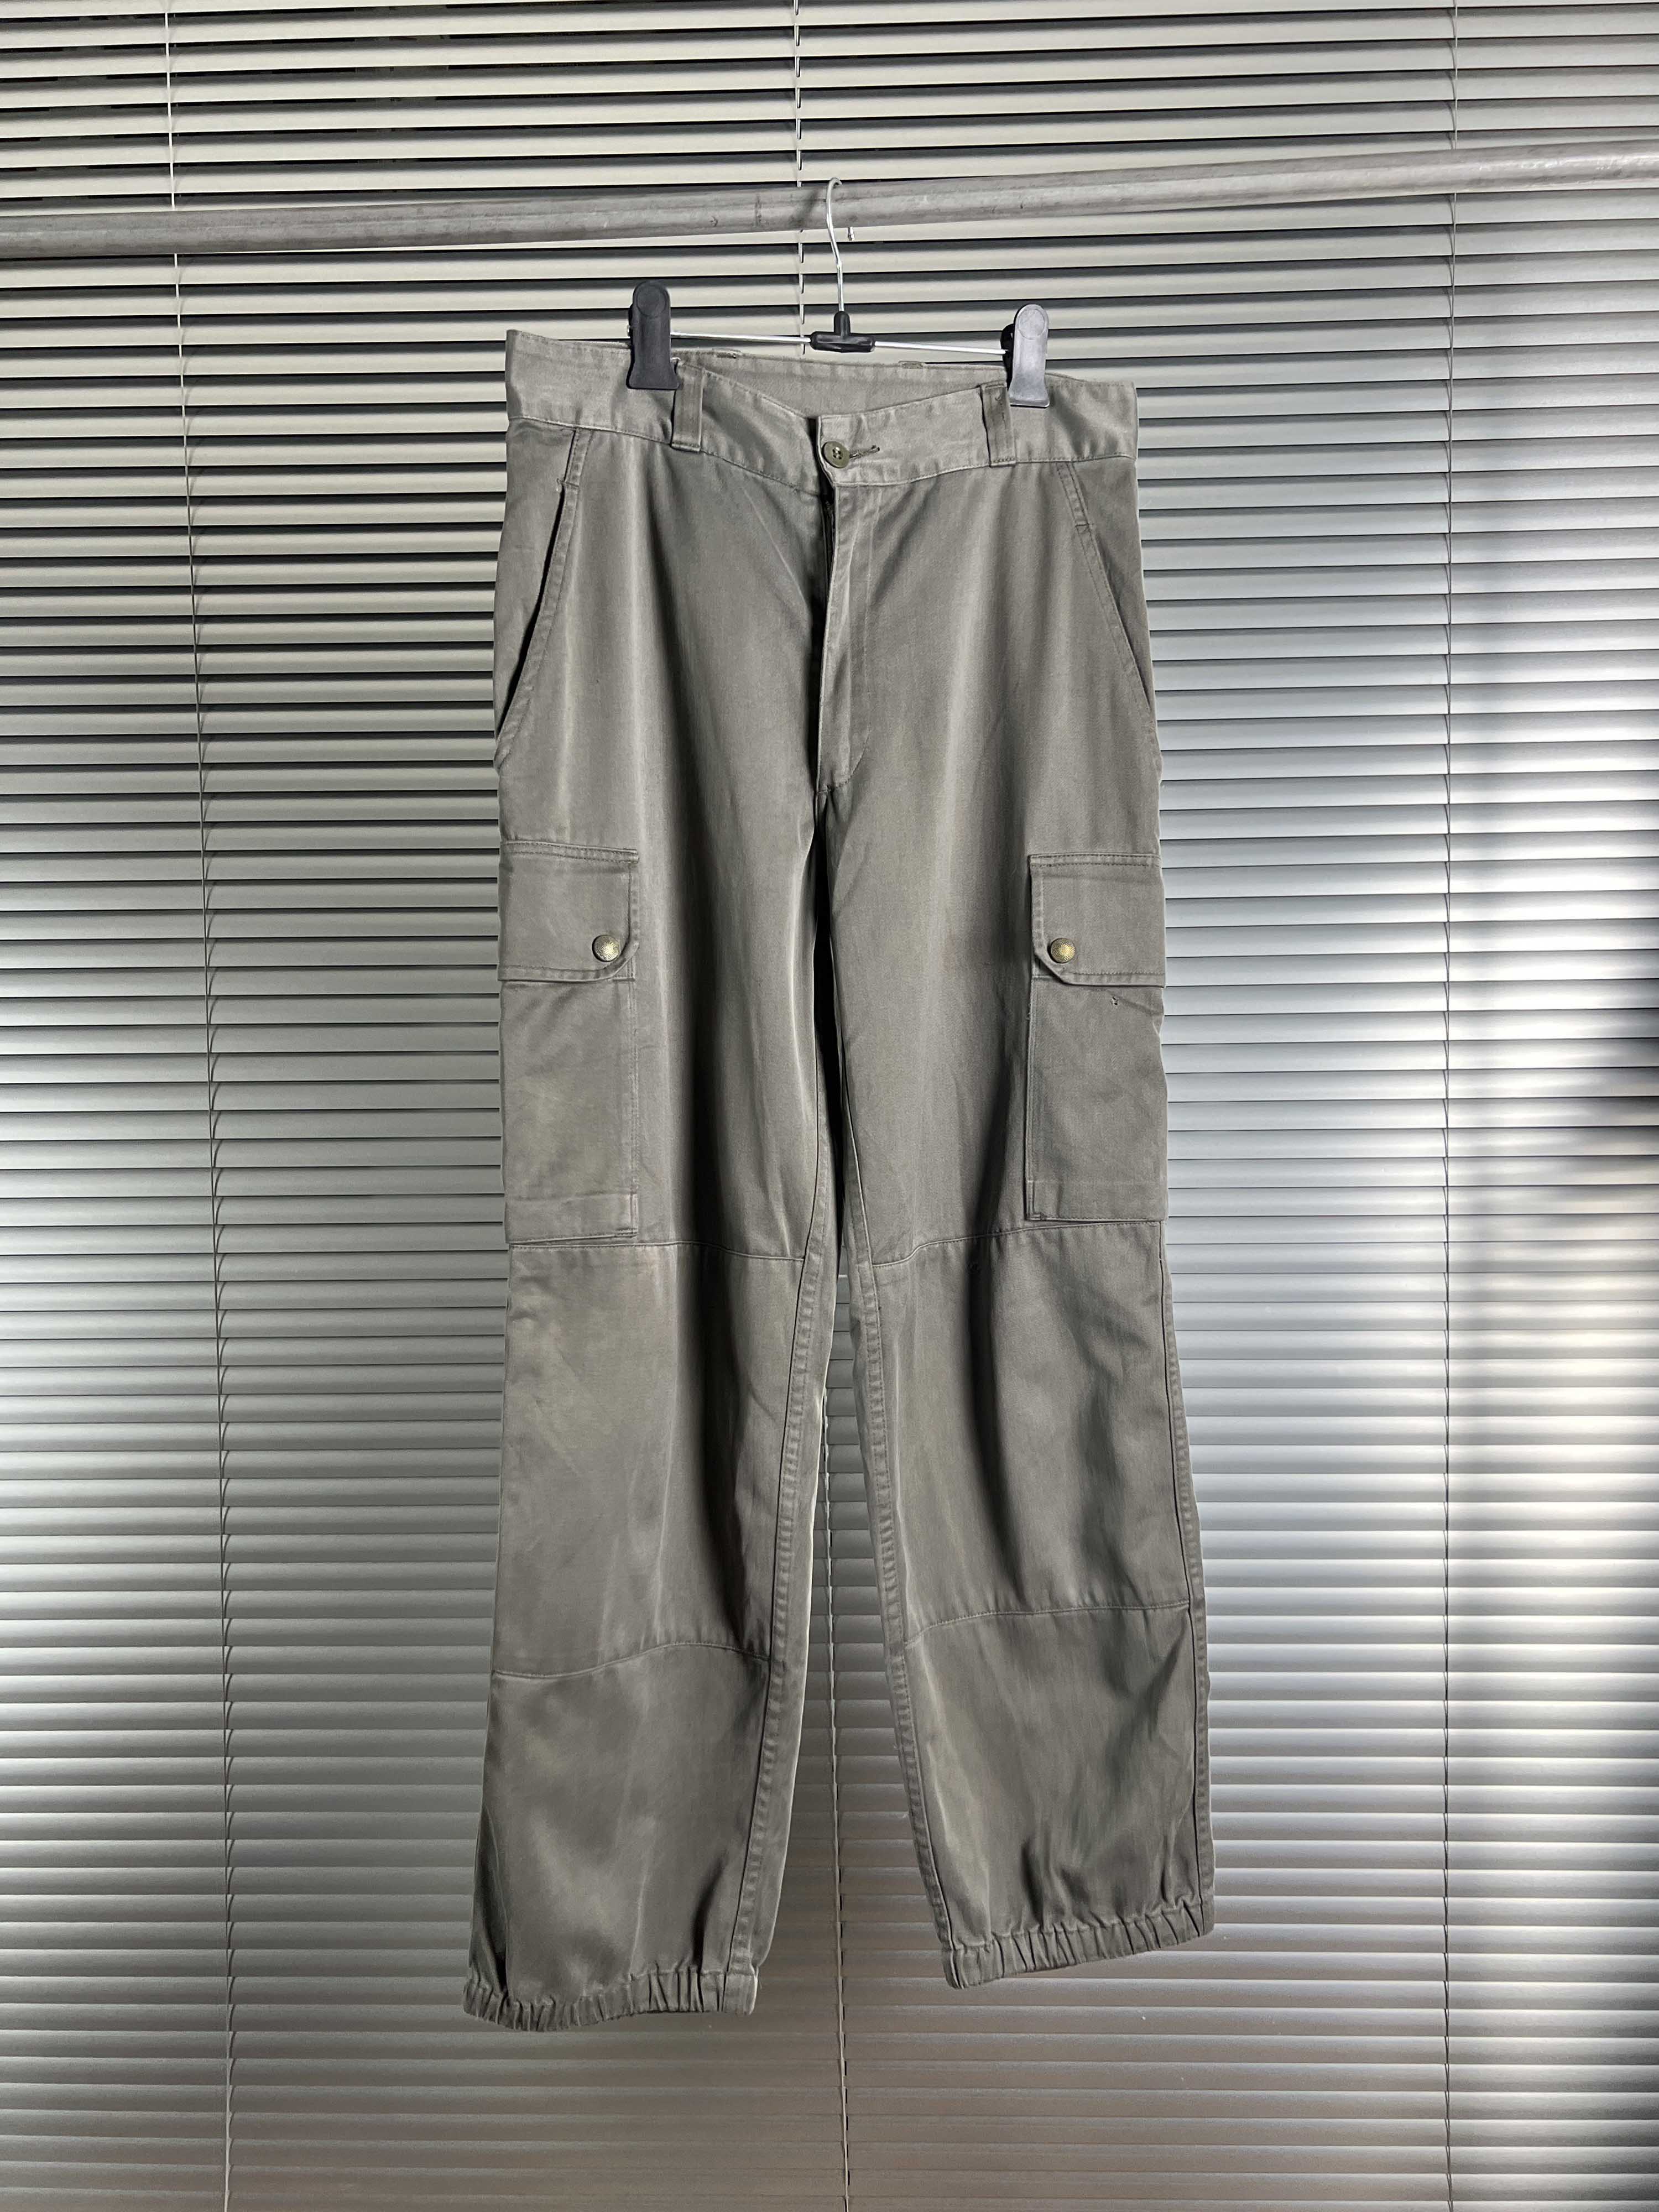 French millitary F2 pants